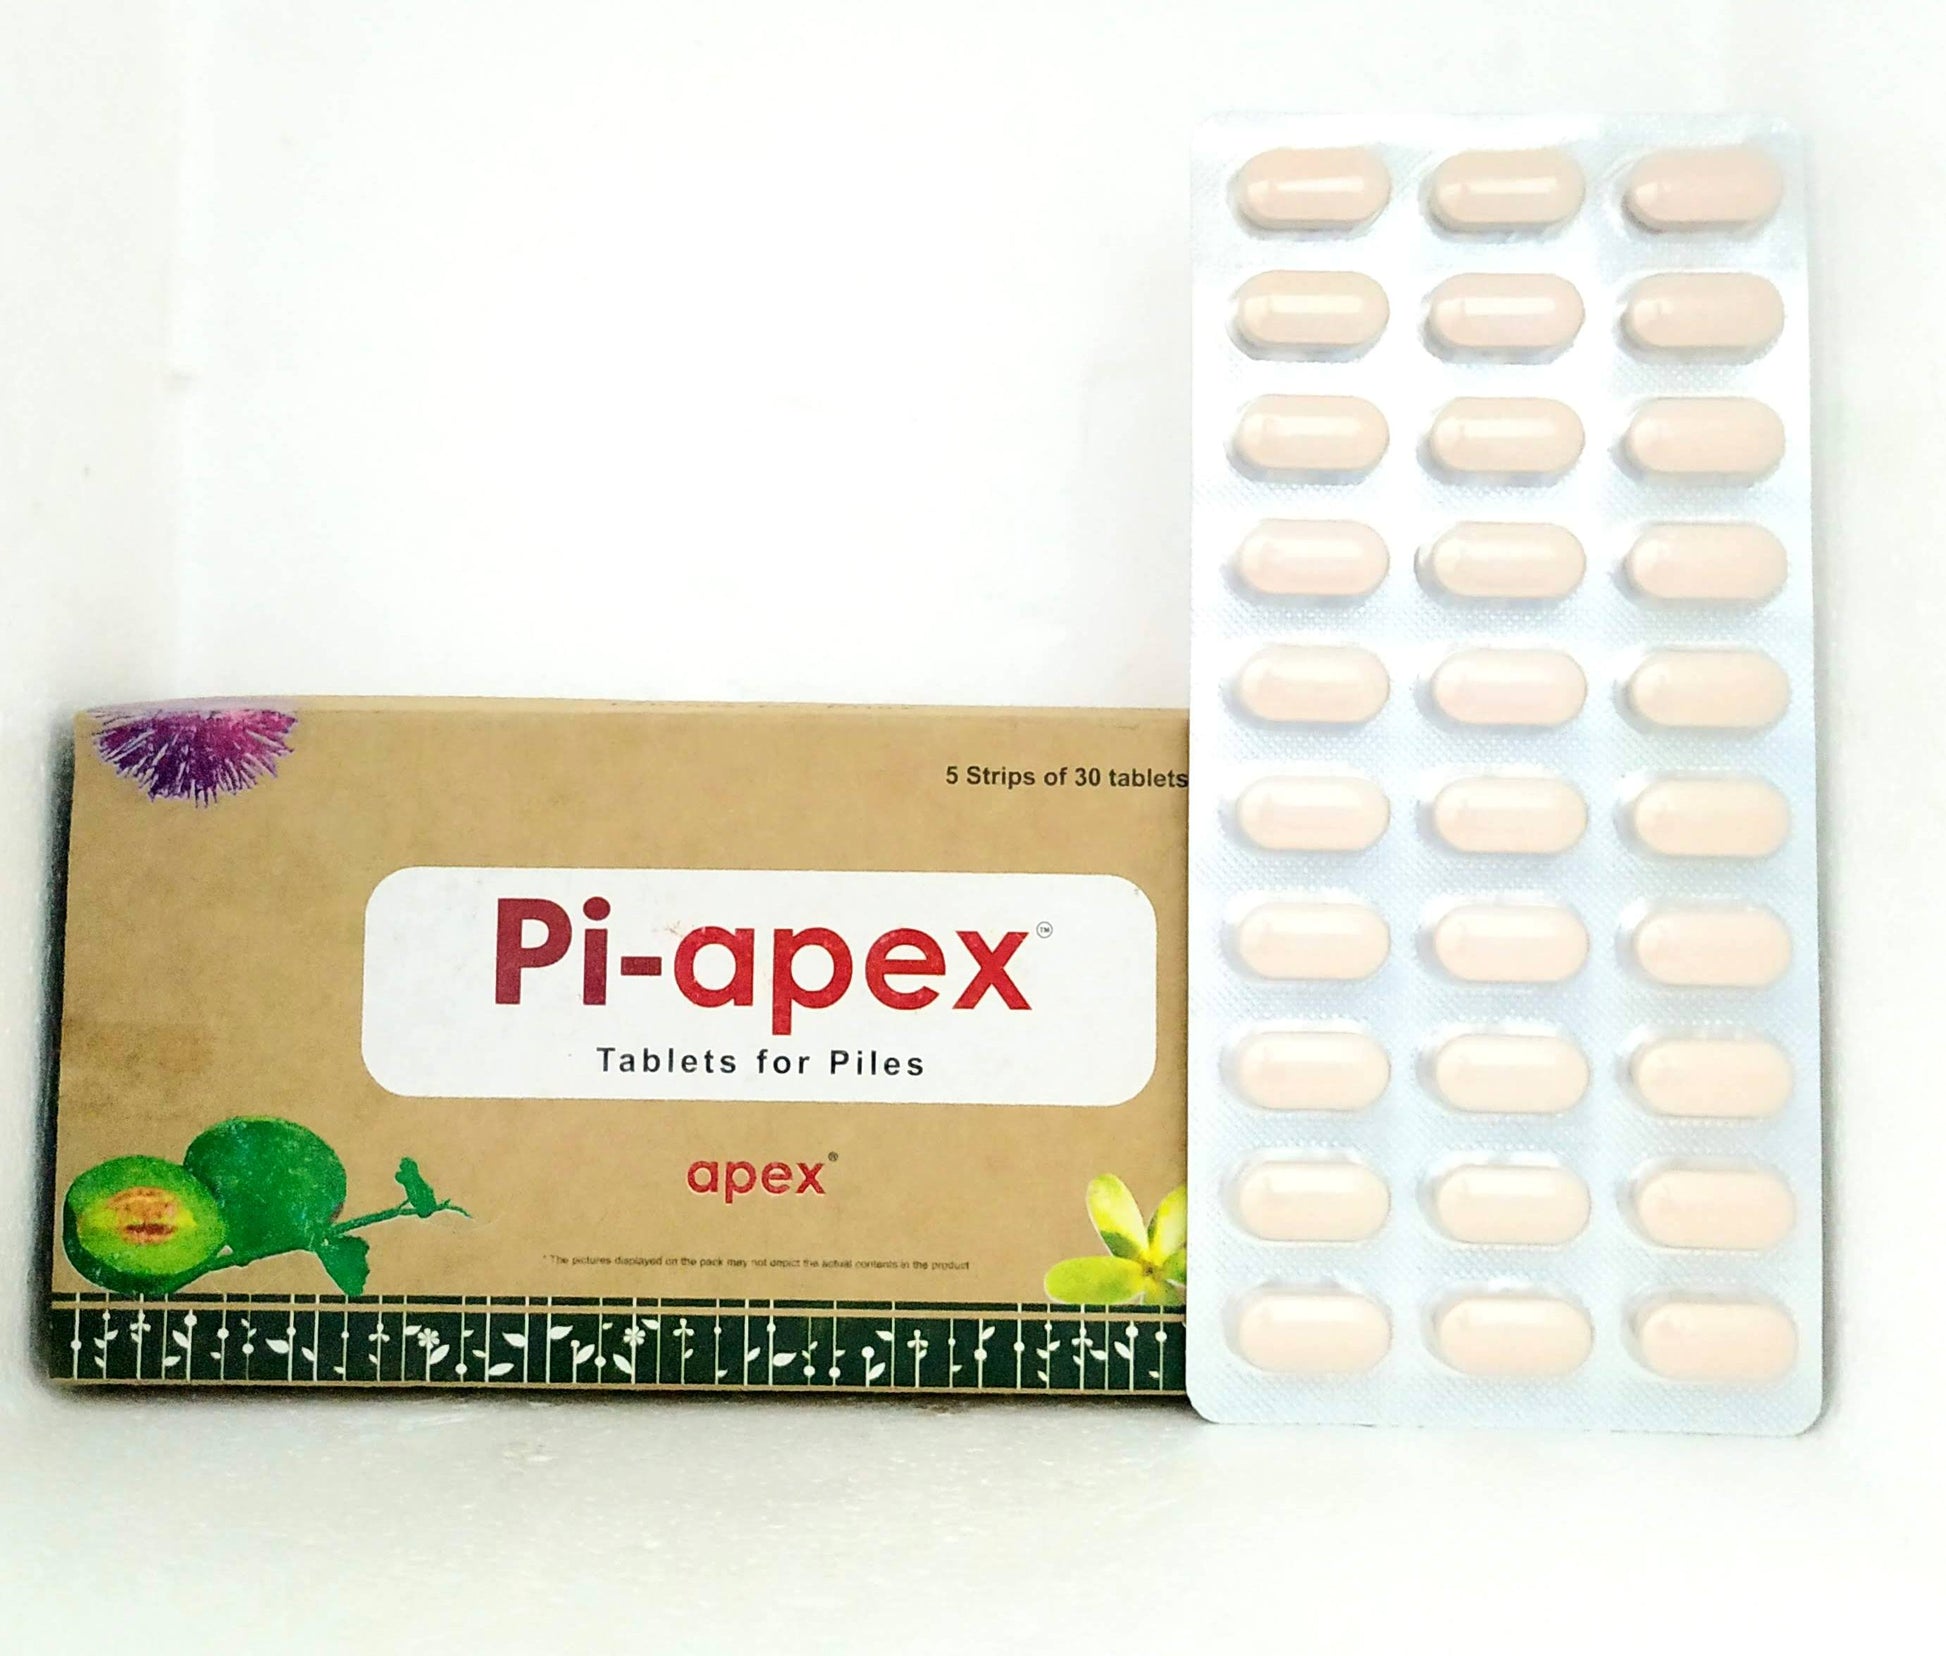 Shop Pi-apex Tablets - 30Tablets at price 108.00 from Apex Ayurveda Online - Ayush Care